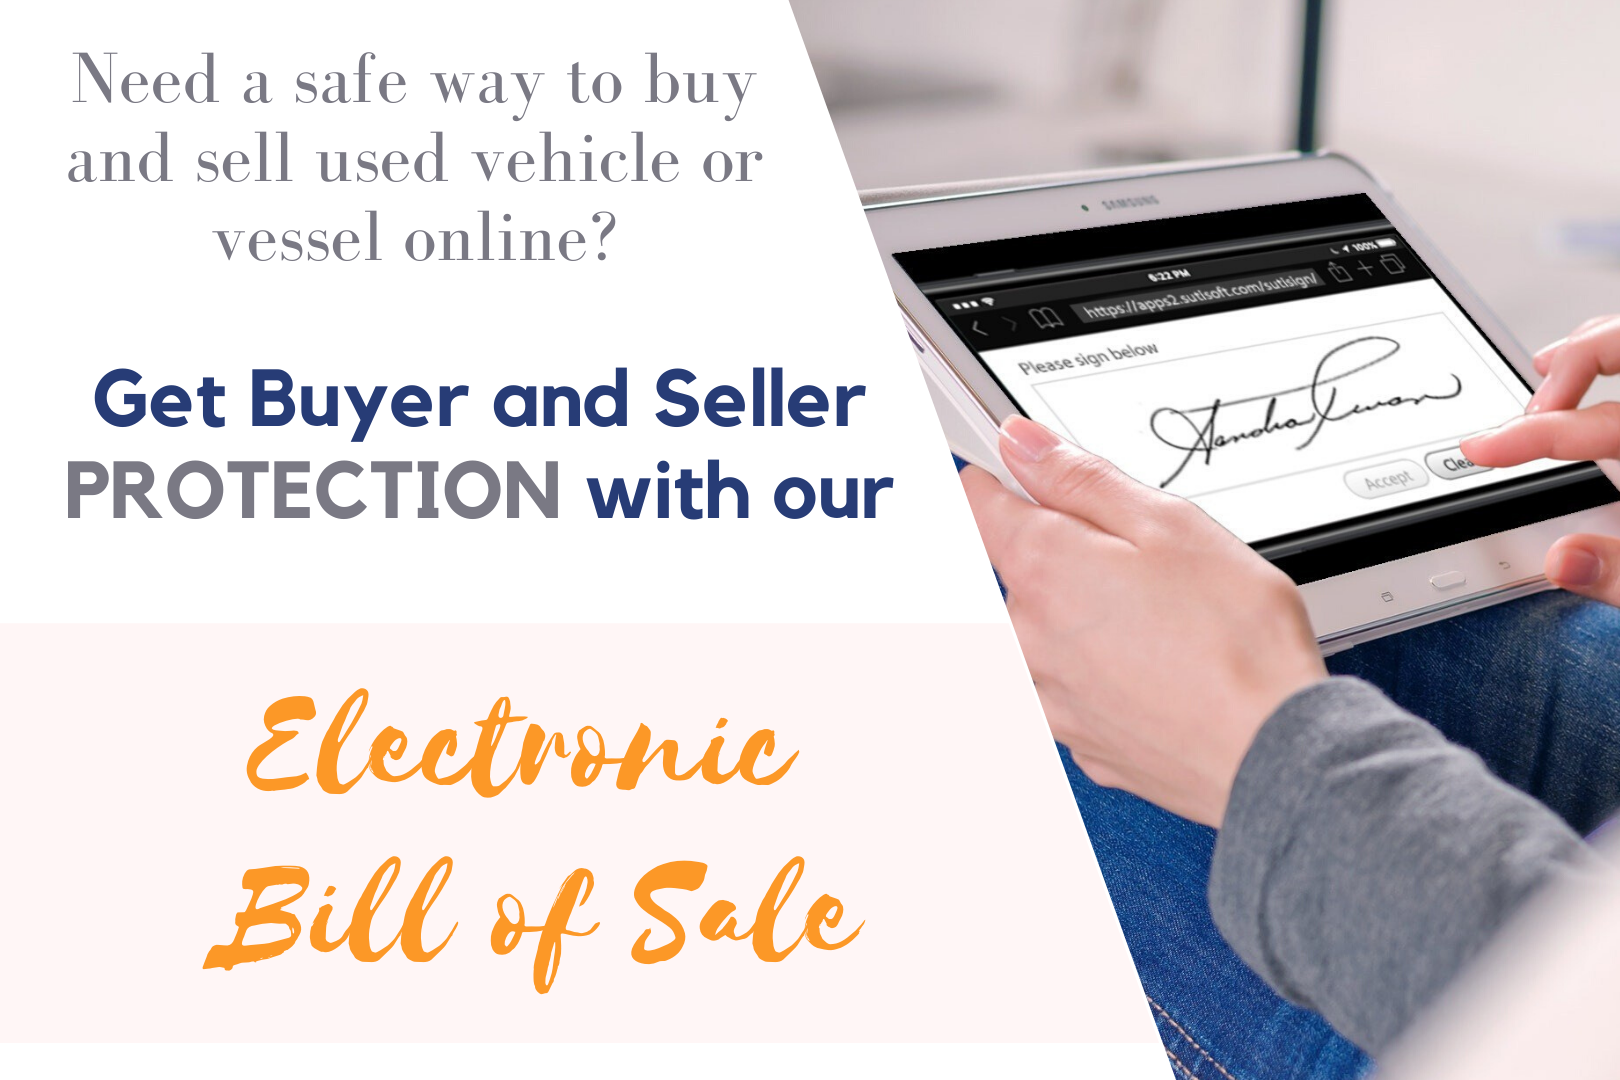 Electronic Bill of Sale